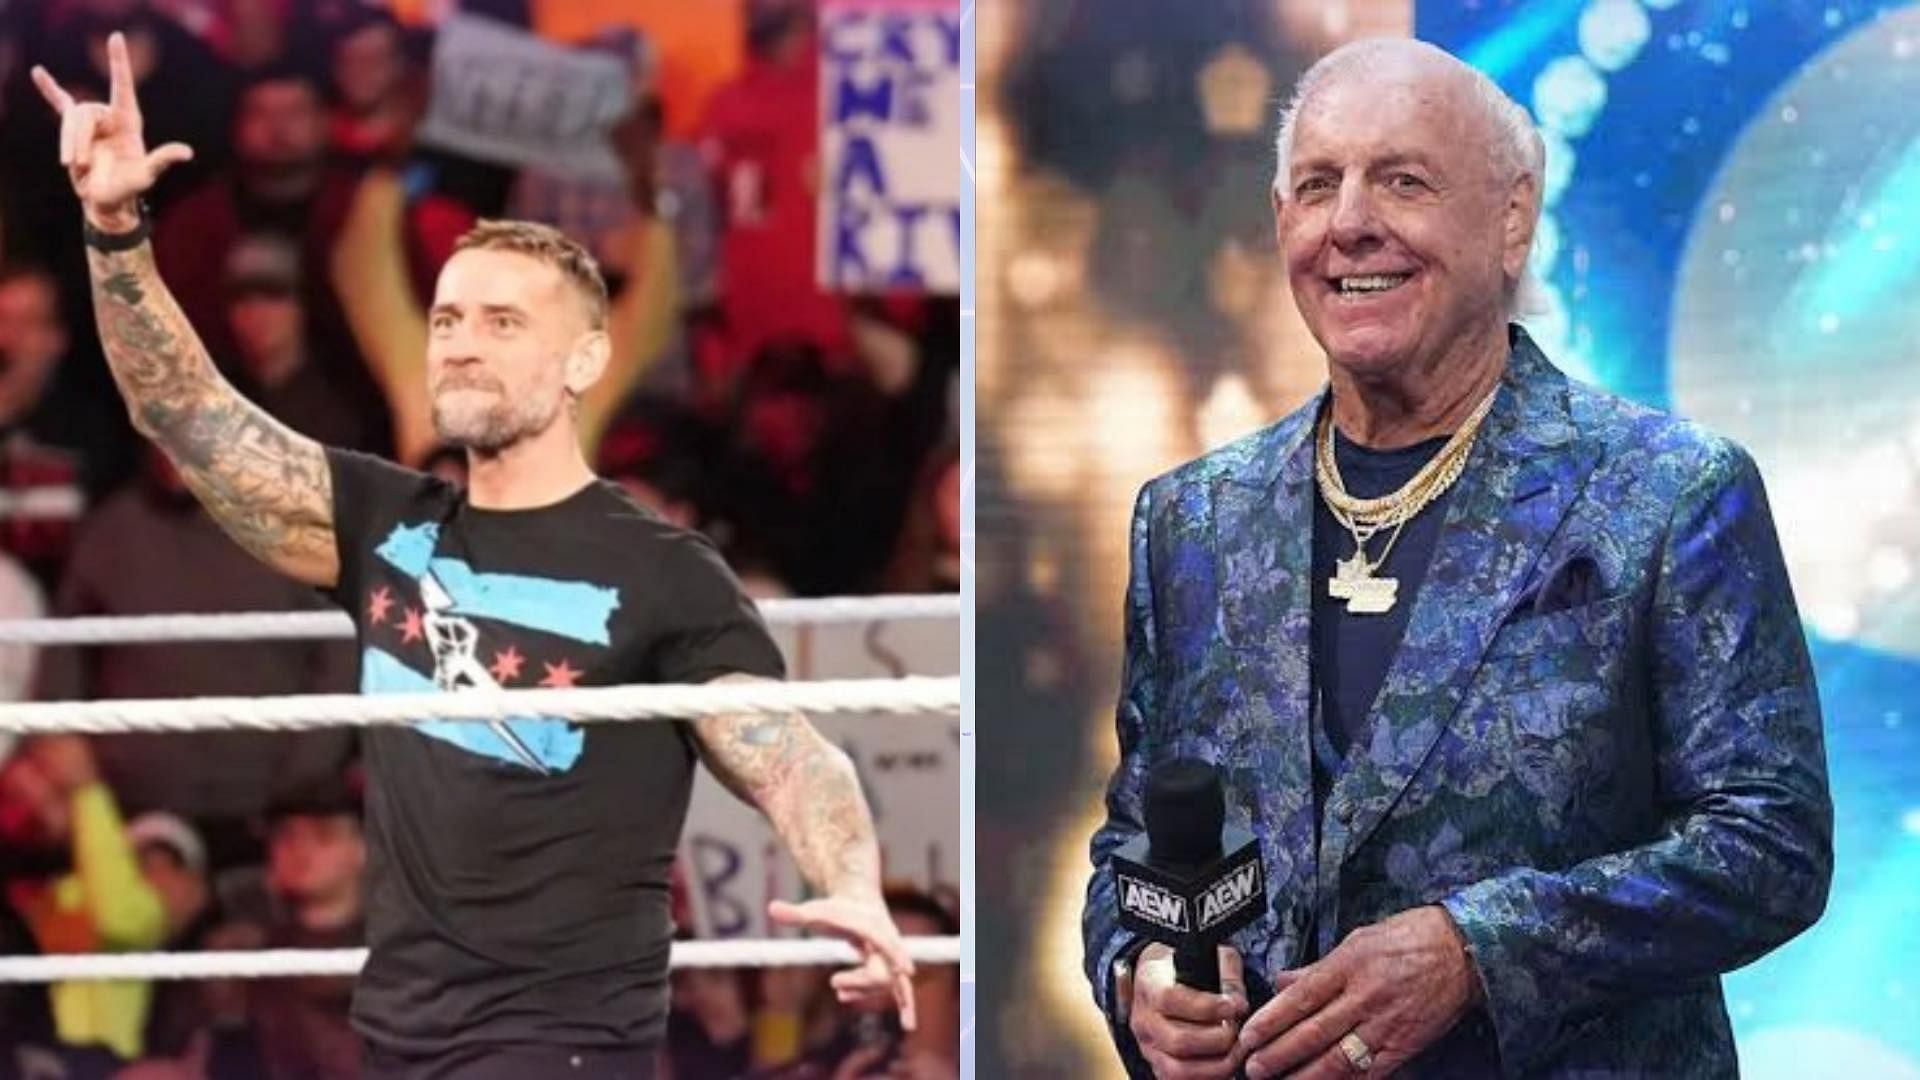 CM Punk and Ric Flair in picture